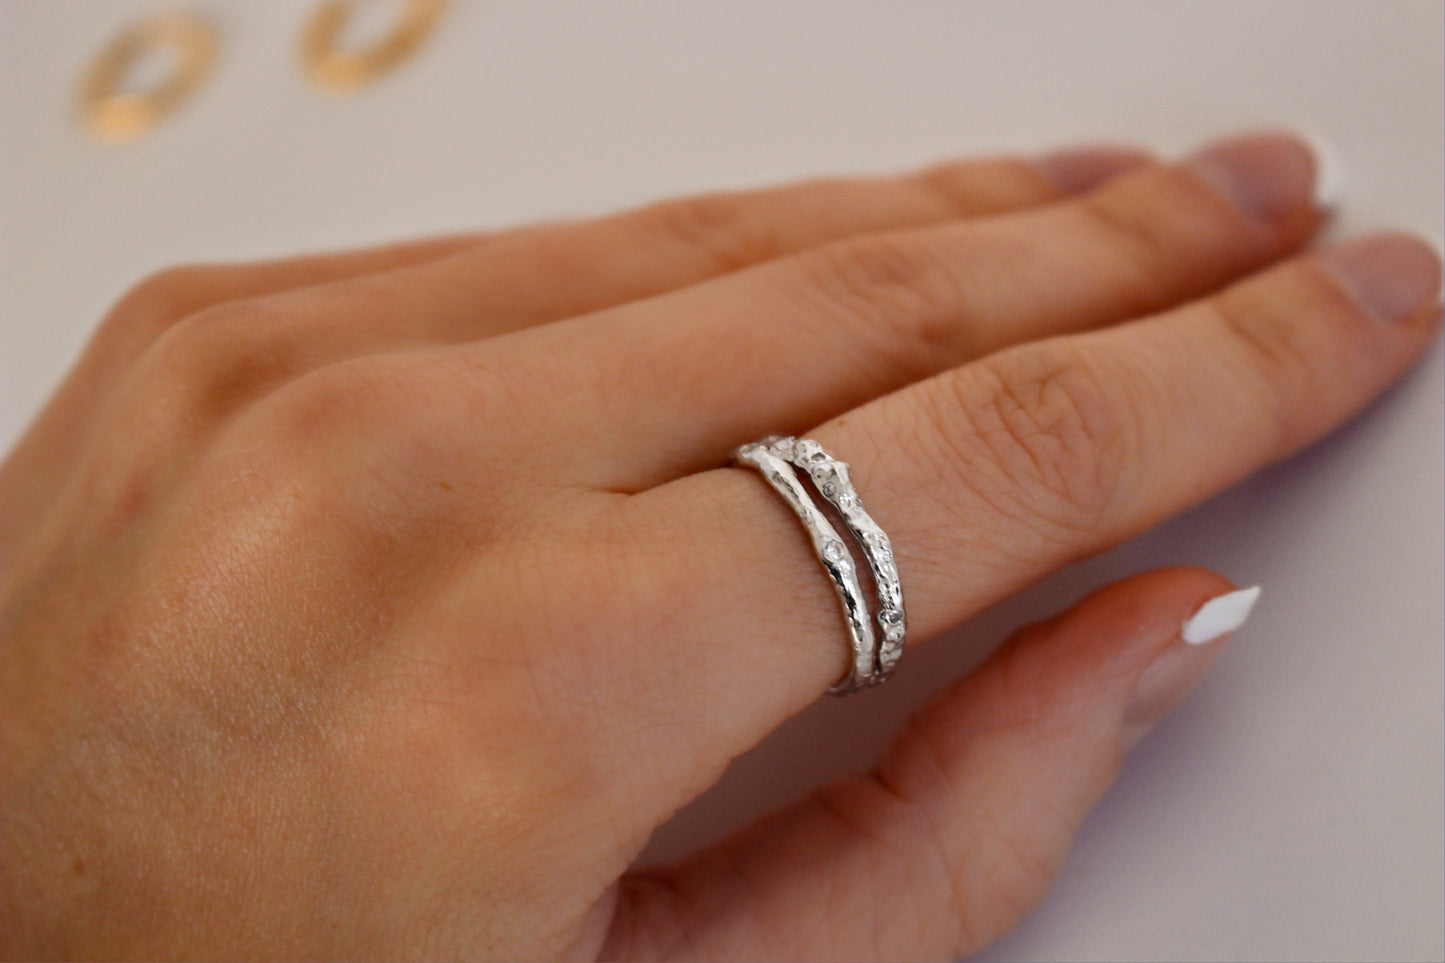 ROCKY - Waterproof Ring in 925 Sterling Silver ∙ Thin Fine Stackable ring ∙ Easy adjustable ring ∙ 100% silver ∙ Micro-inlaid zircon